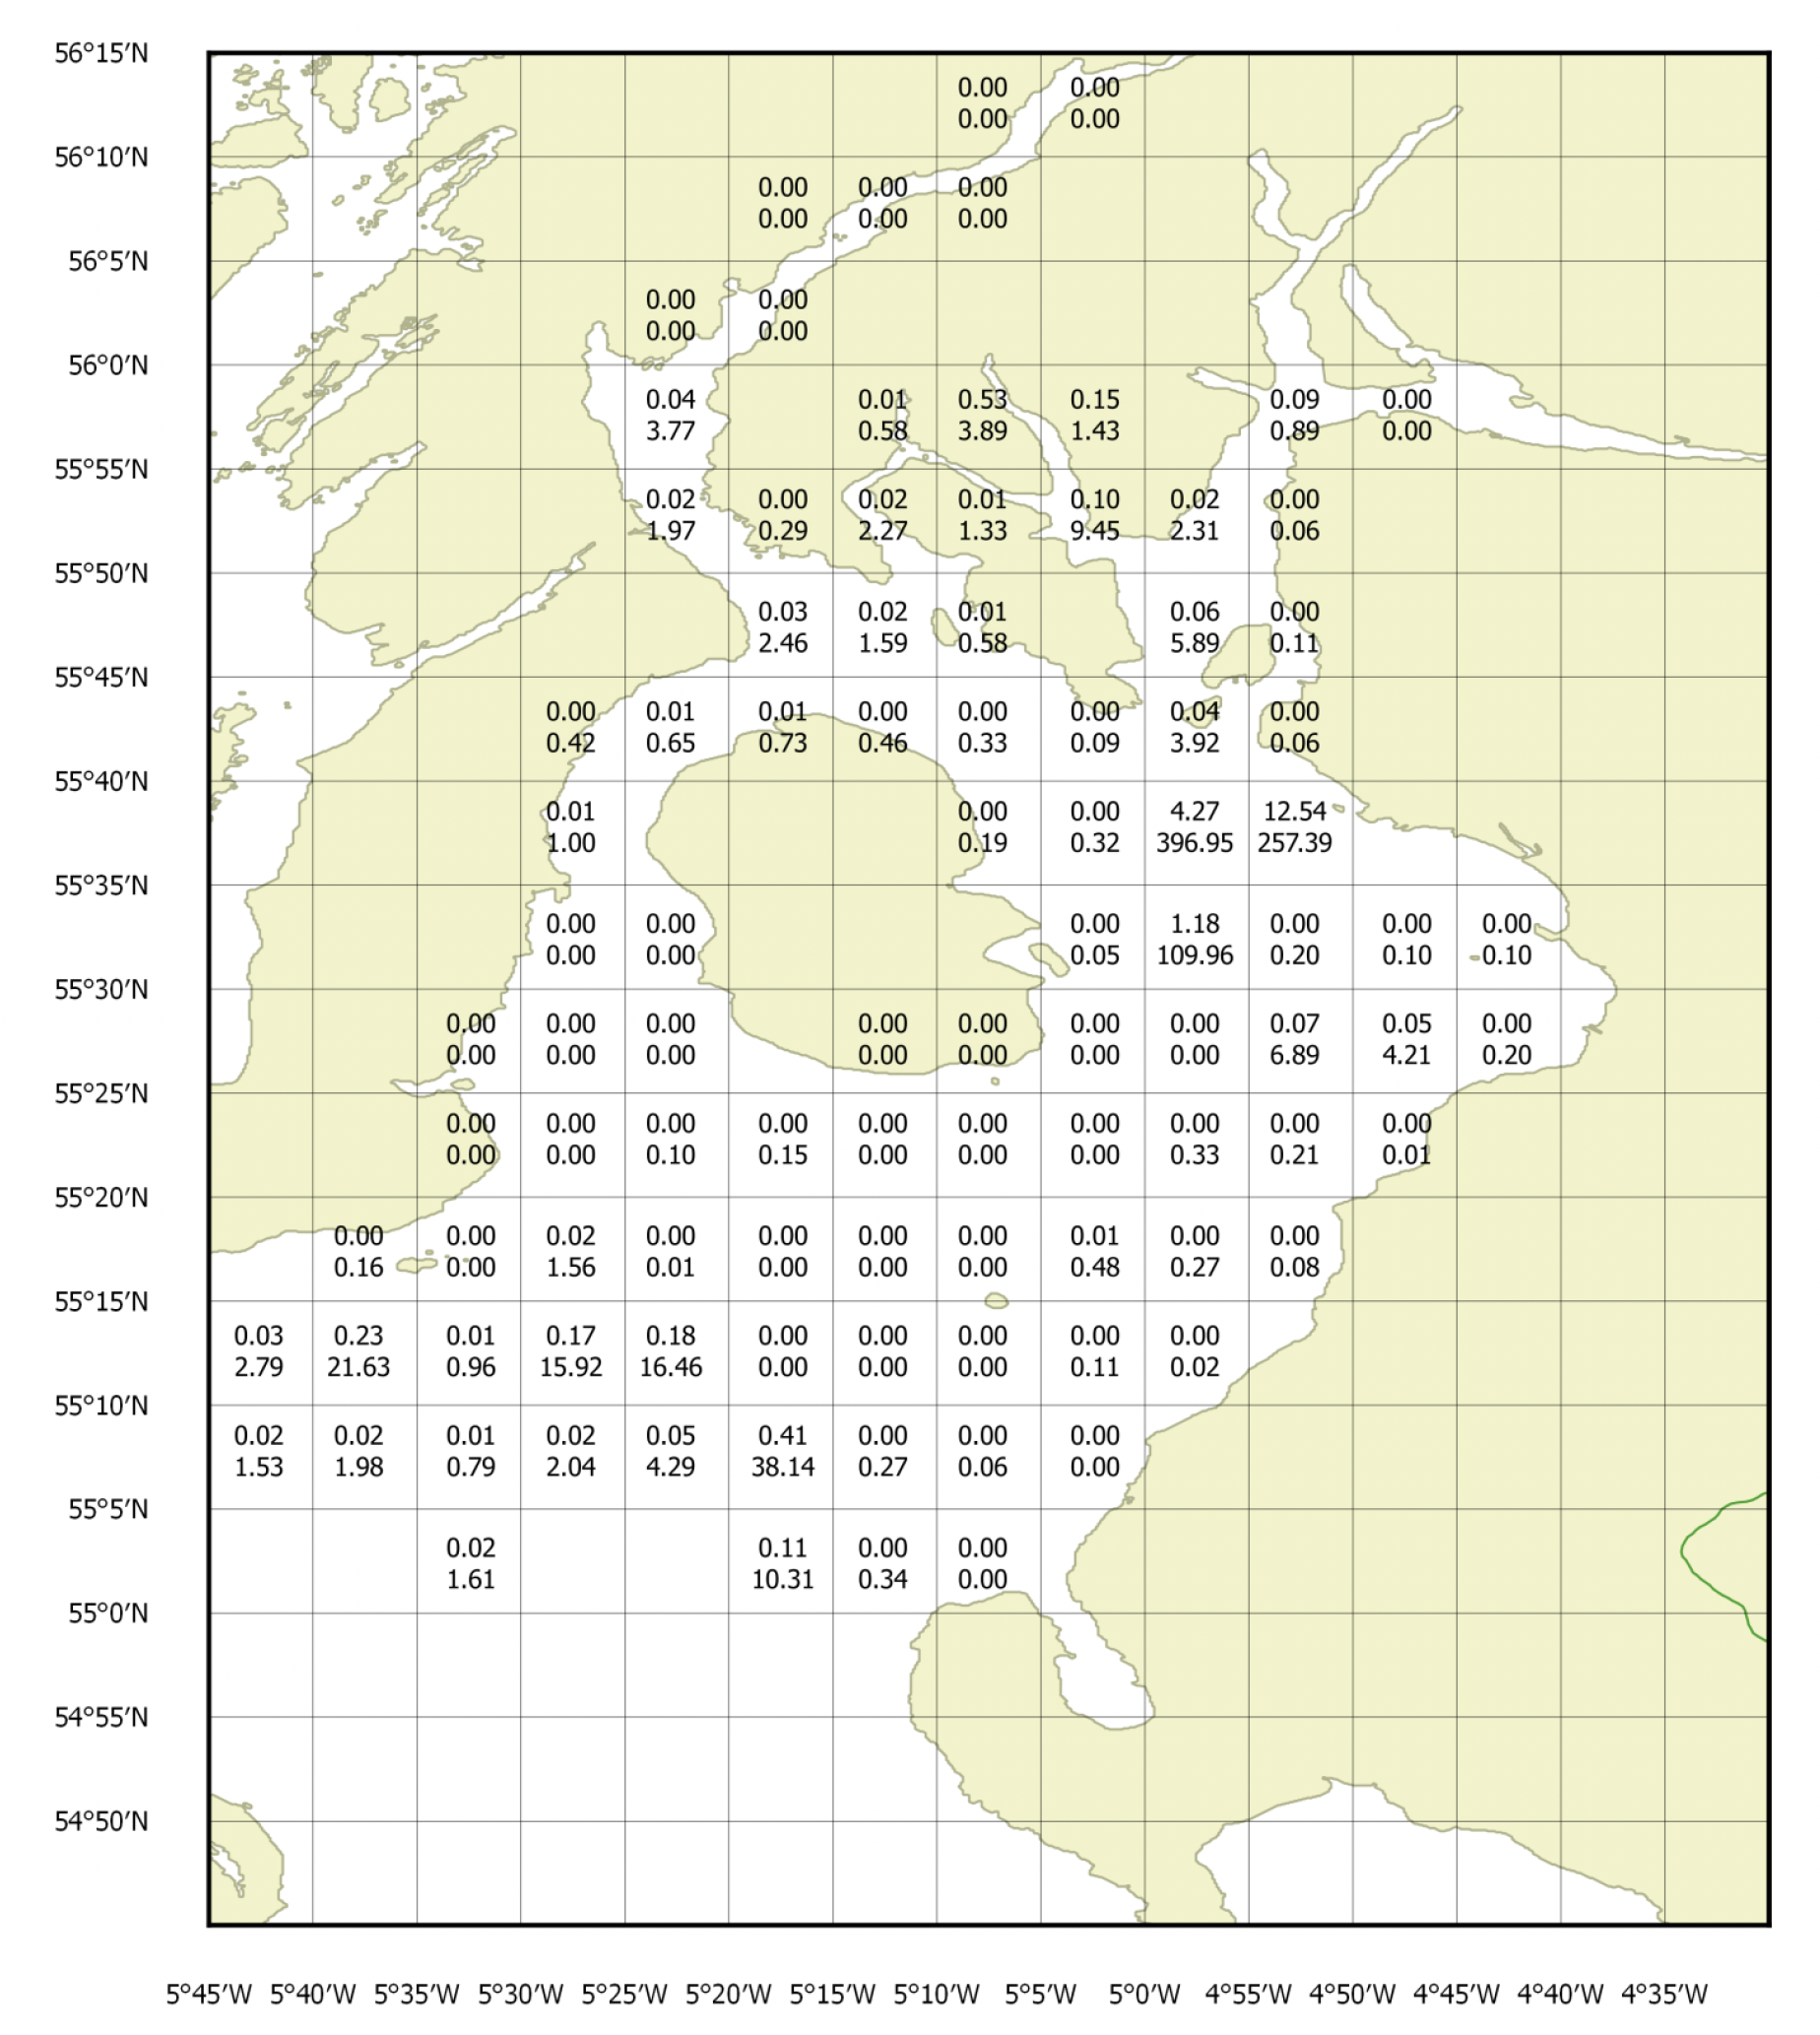 Distribution of herring in Clyde herring acoustic survey maps in 2016. Weight in thousand tonnes (upper figure) and numbers in millions (lower figure) for each 5’ by 5’ analysis rectangle